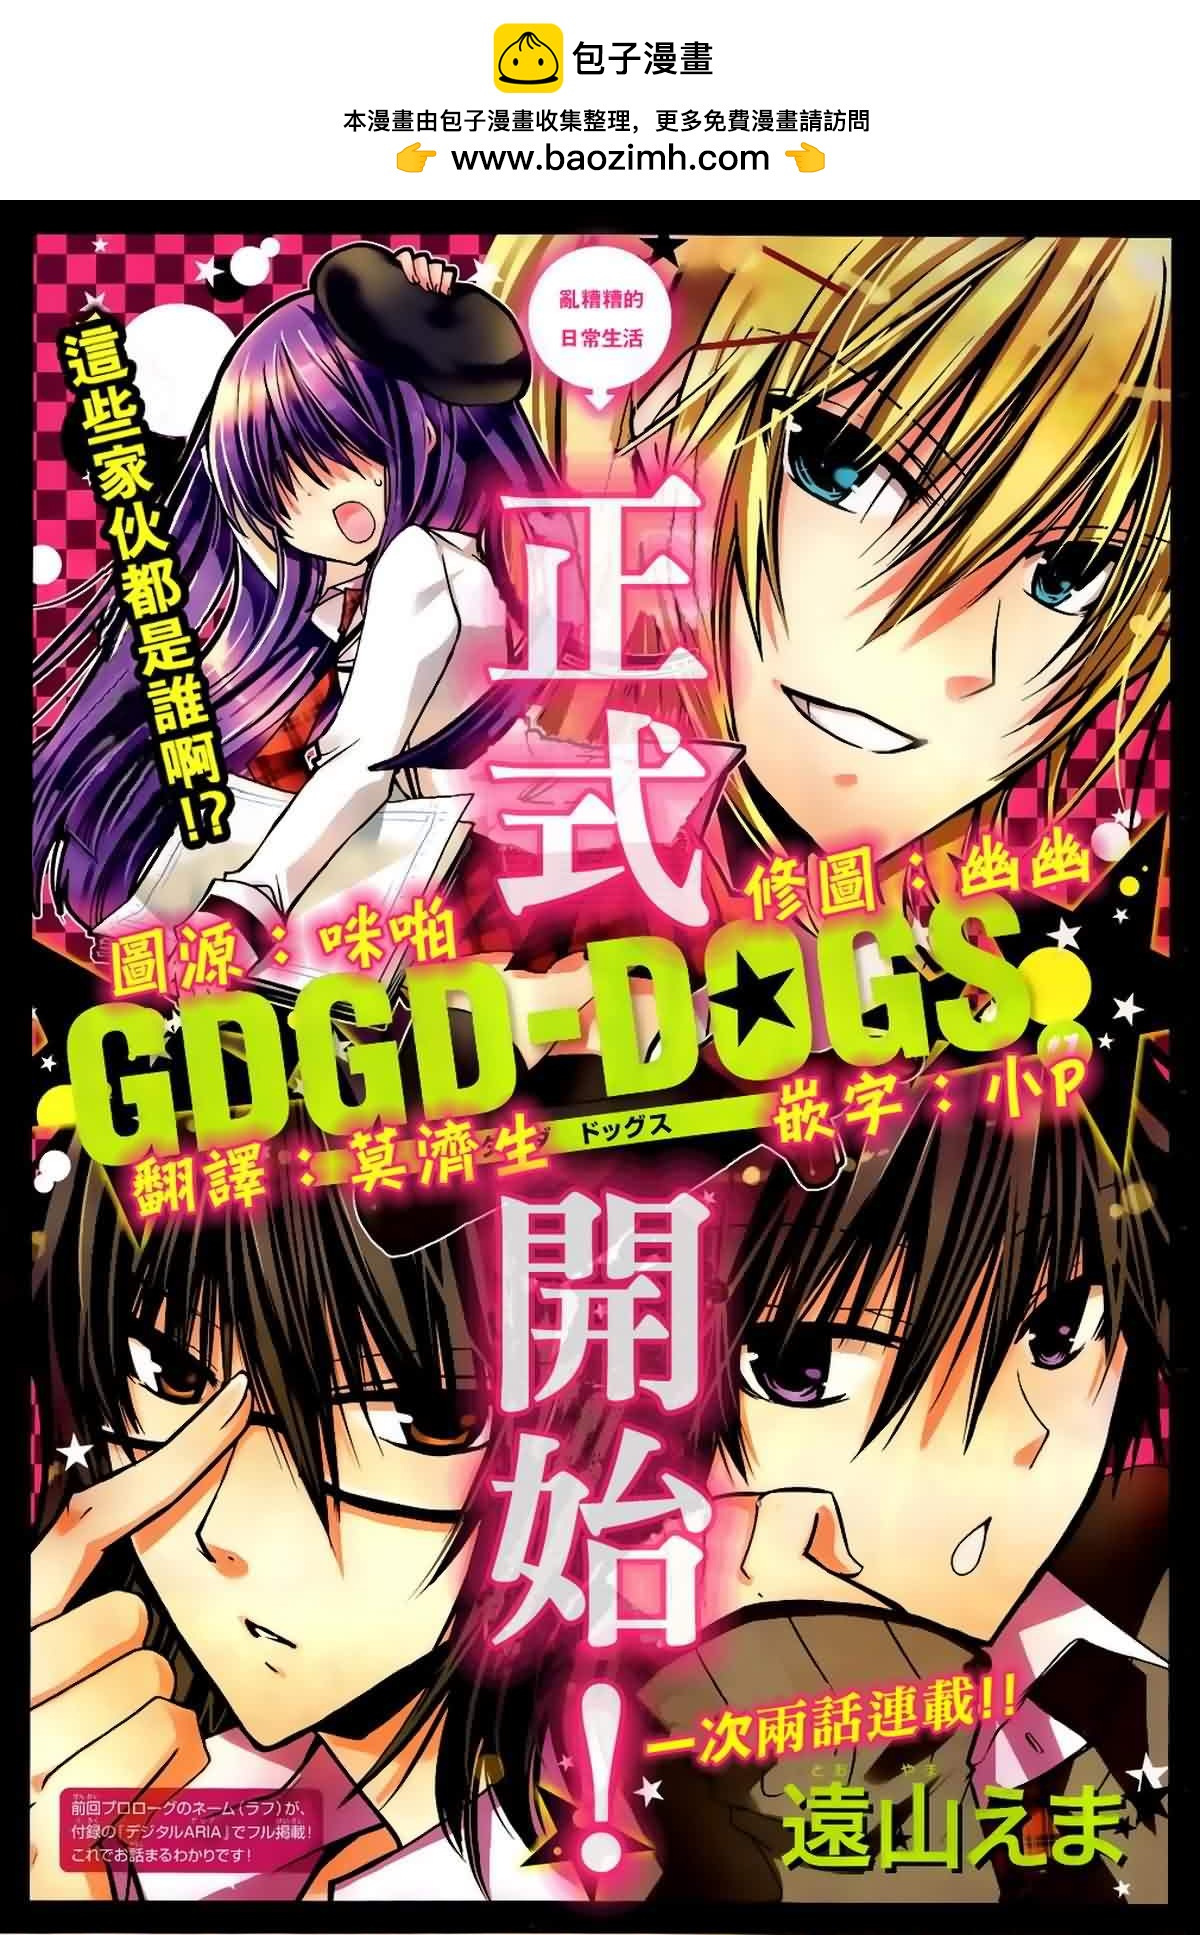 GDGD-DOGS - 第01話 - 1